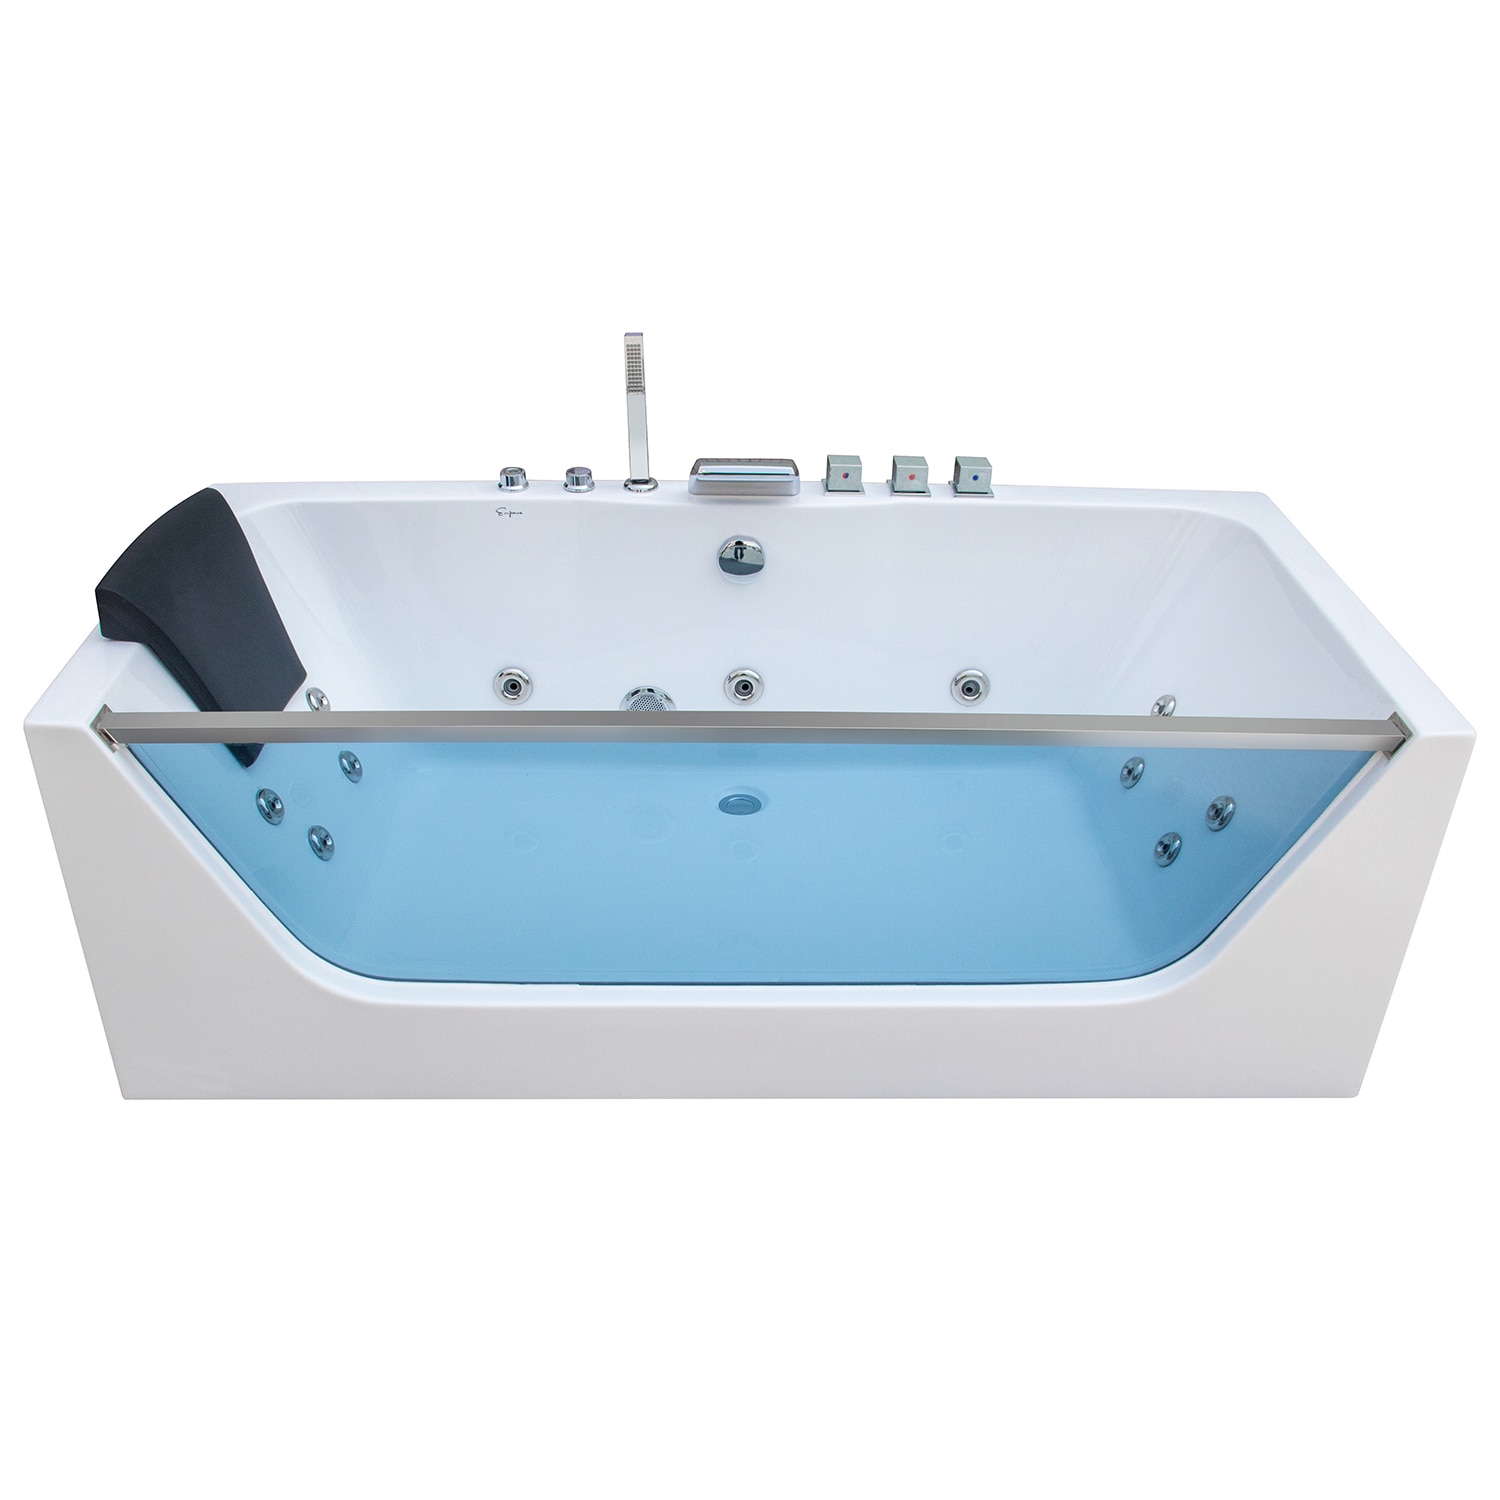 Empava Whirlpool Bathtub with 11 Jets,59 Spa Tub with Light,Hydromassage  with Chromatherapy,Acrylic,3-Side Apron,White